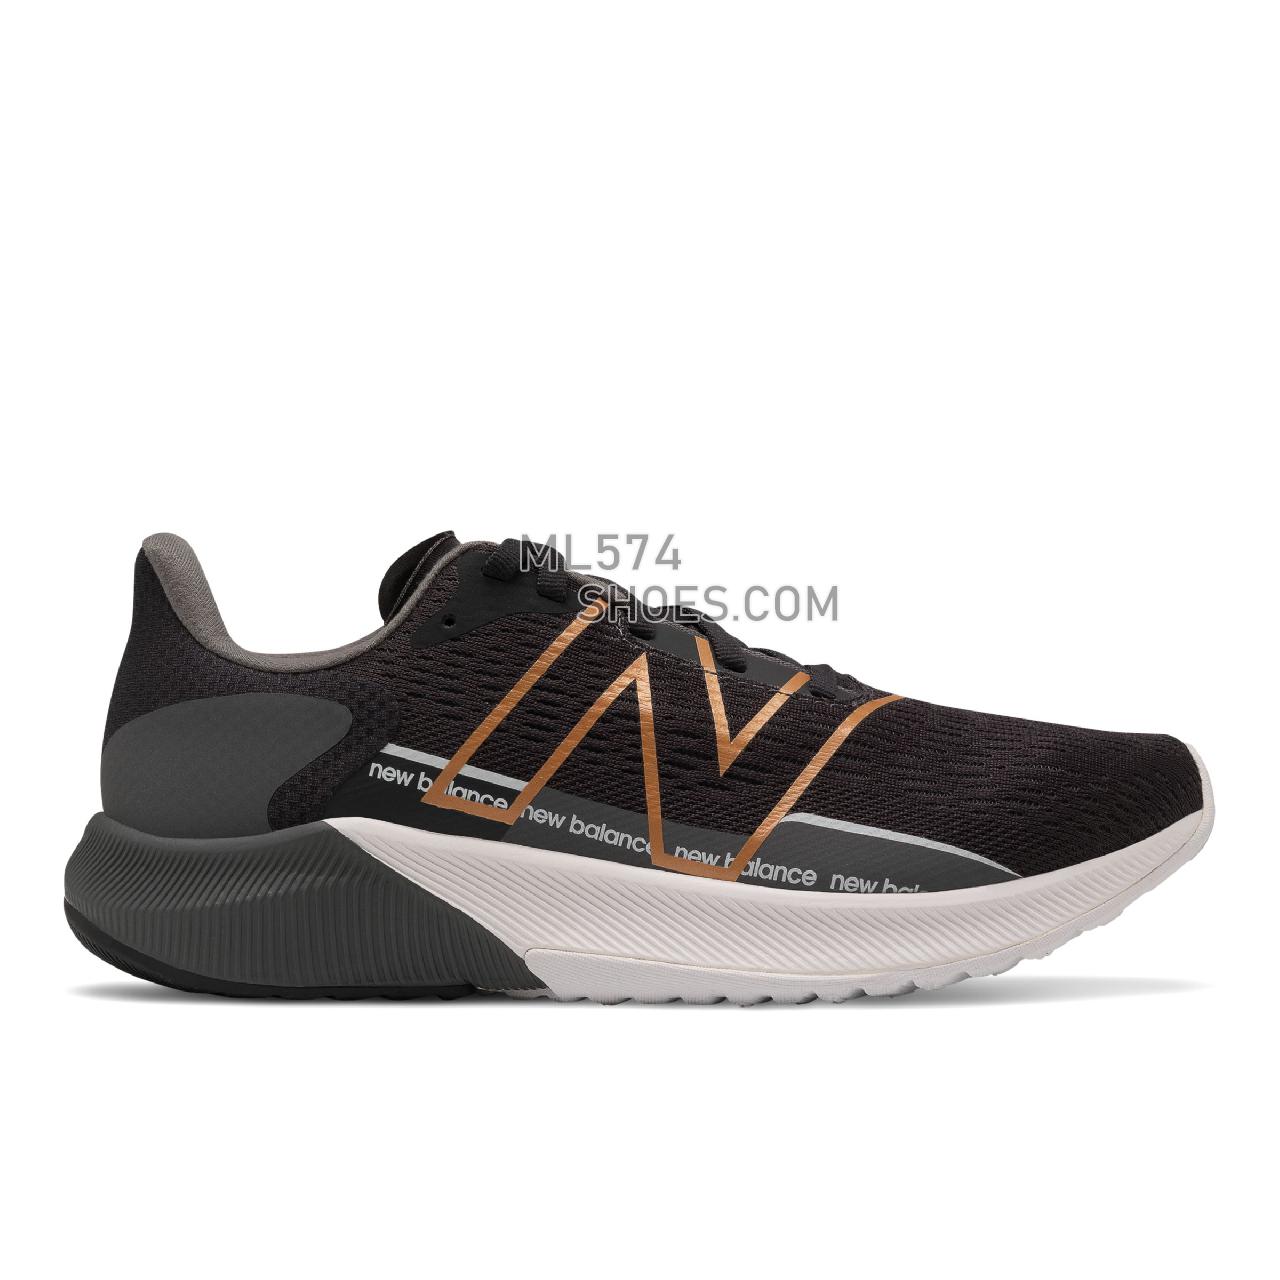 New Balance FuelCell Propel v2 - Women's Fuelcell Sleek And LightWeight - Phantom with Castlerock and Copper Metallic - WFCPRCG2